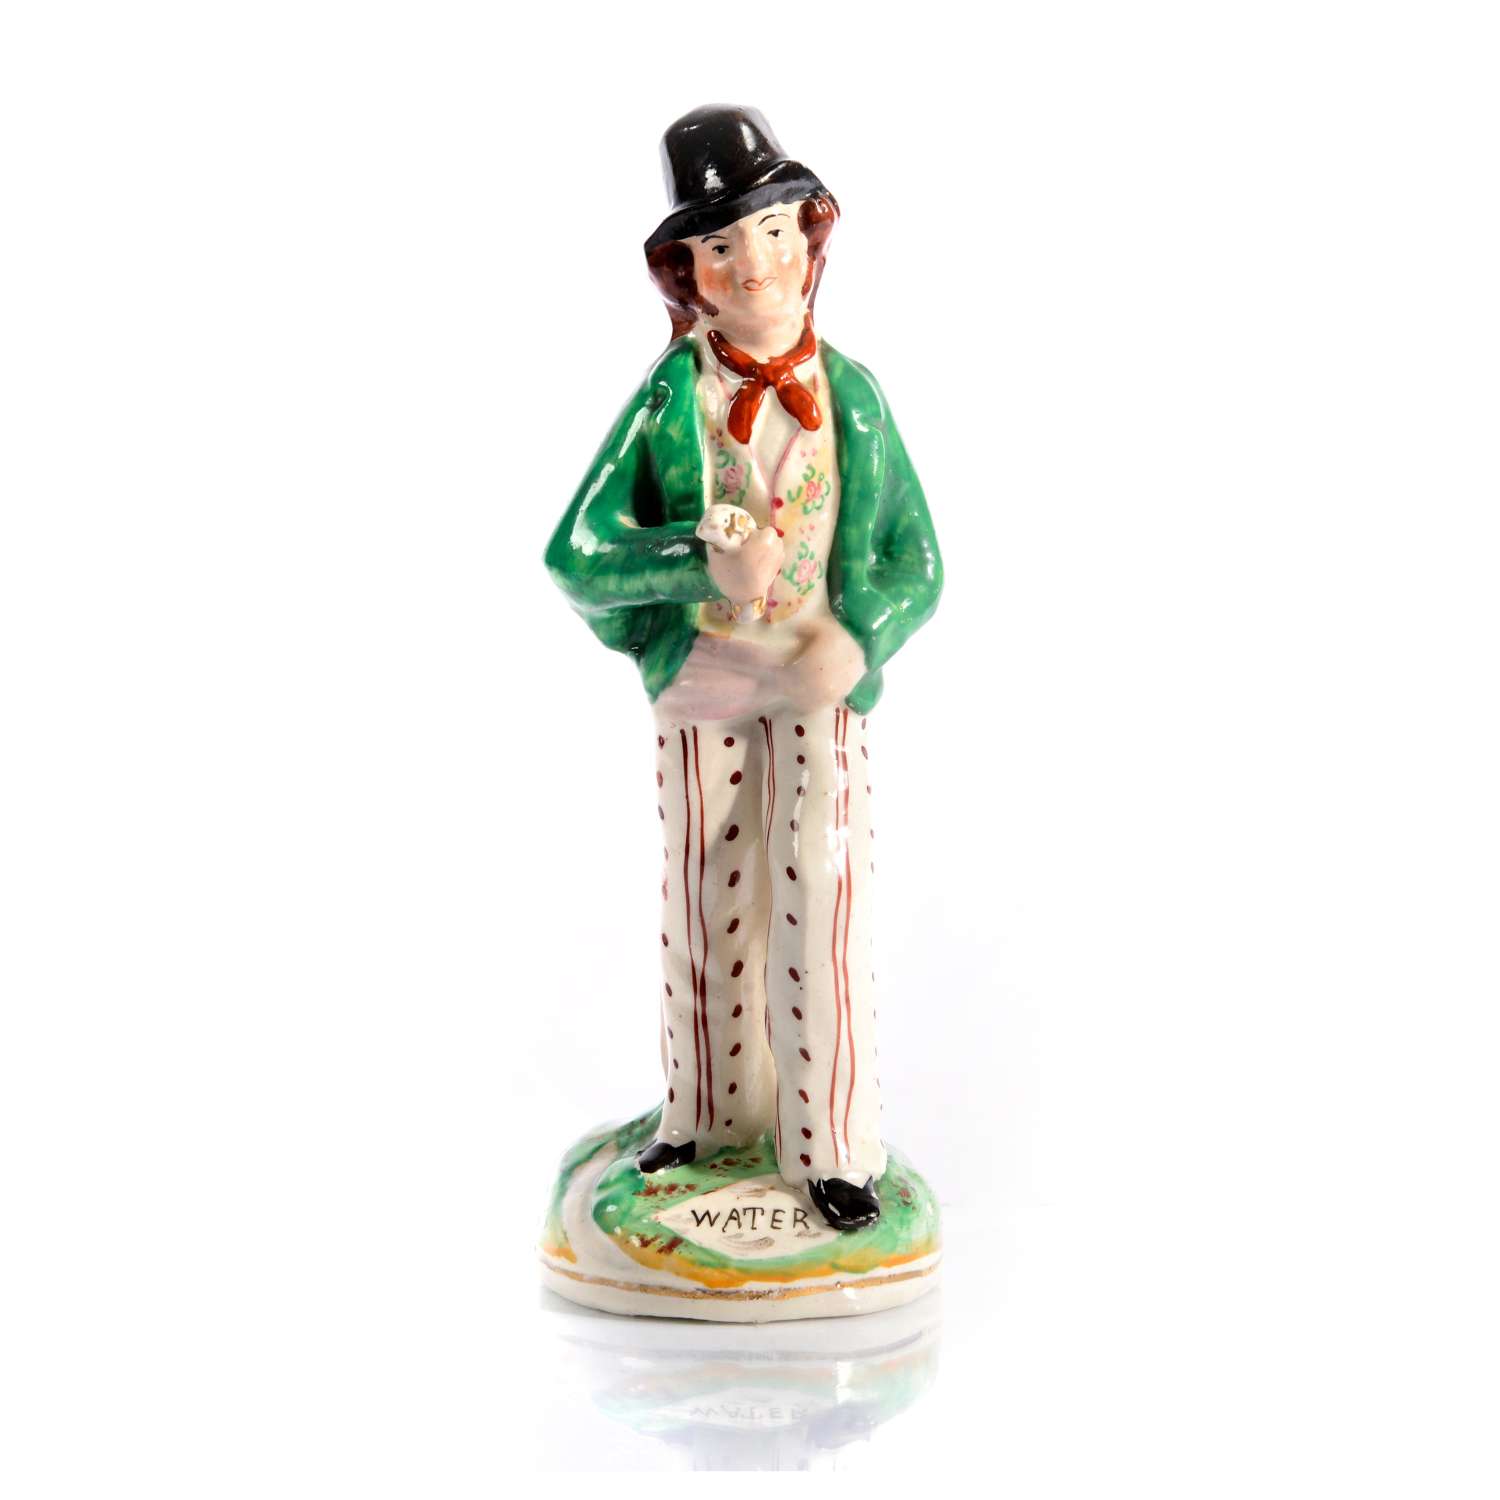 Staffordshire figure entitled “Water and Gin”